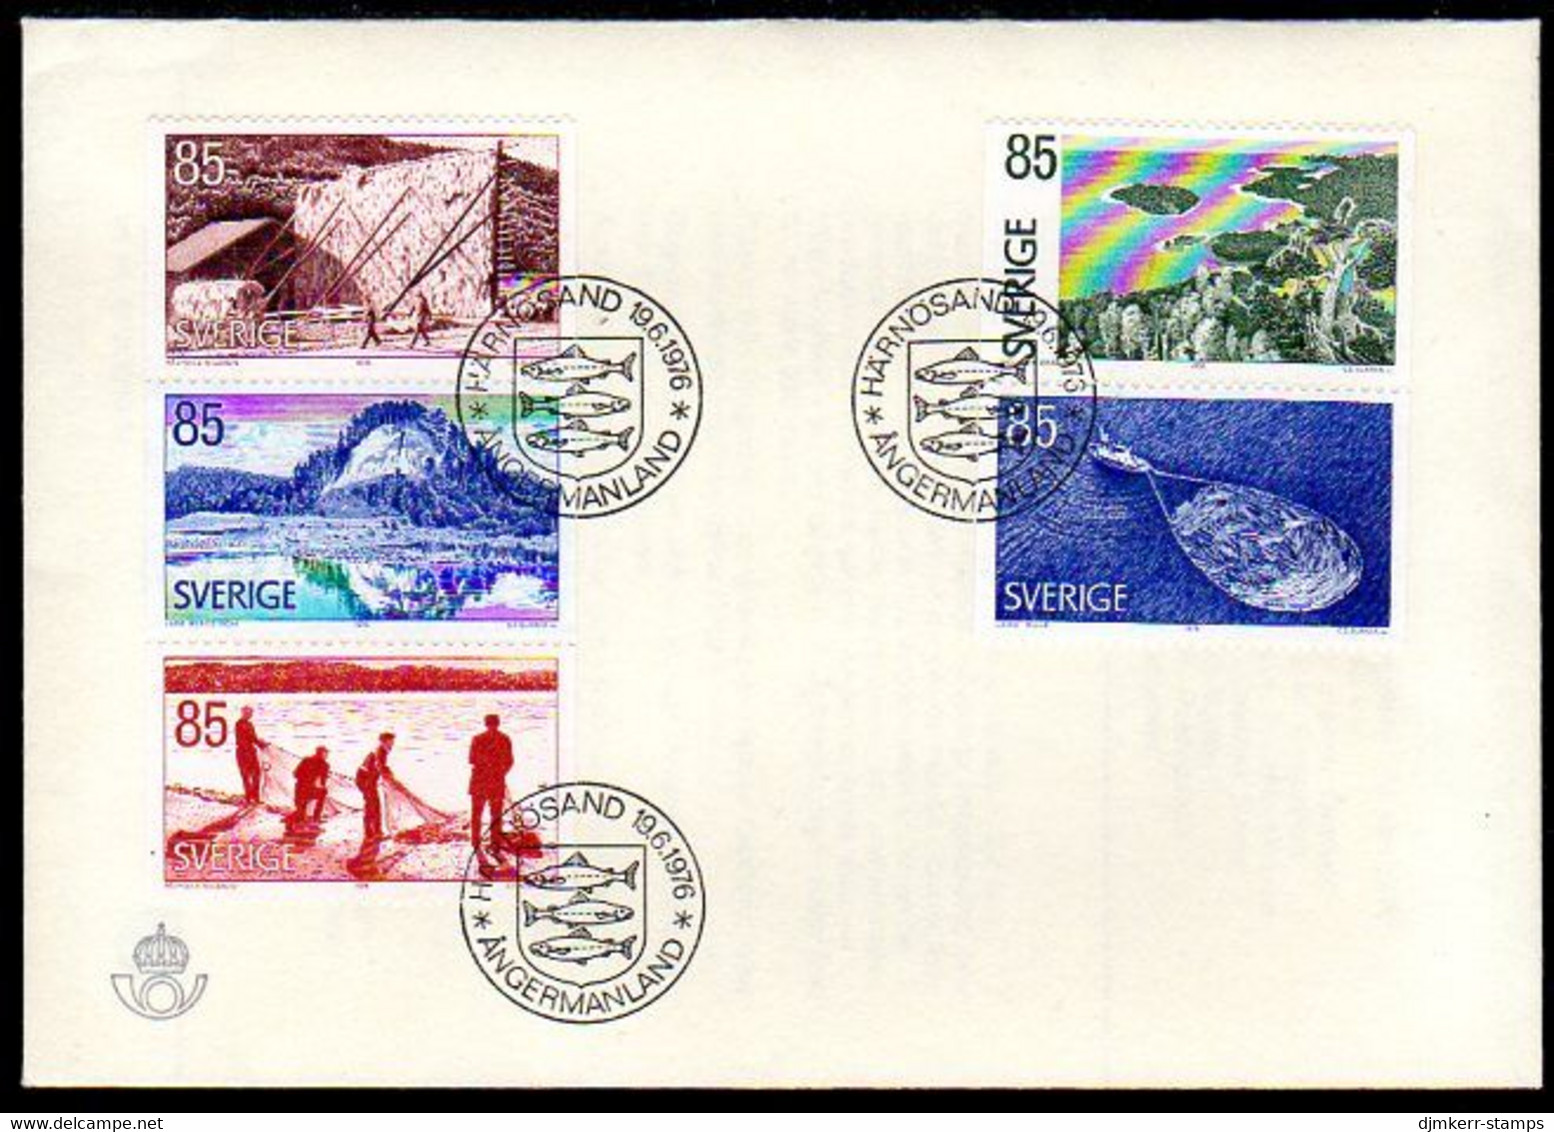 SWEDEN 1976 Tourism: Angermanland FDC.  Michel 945-49 - FDC